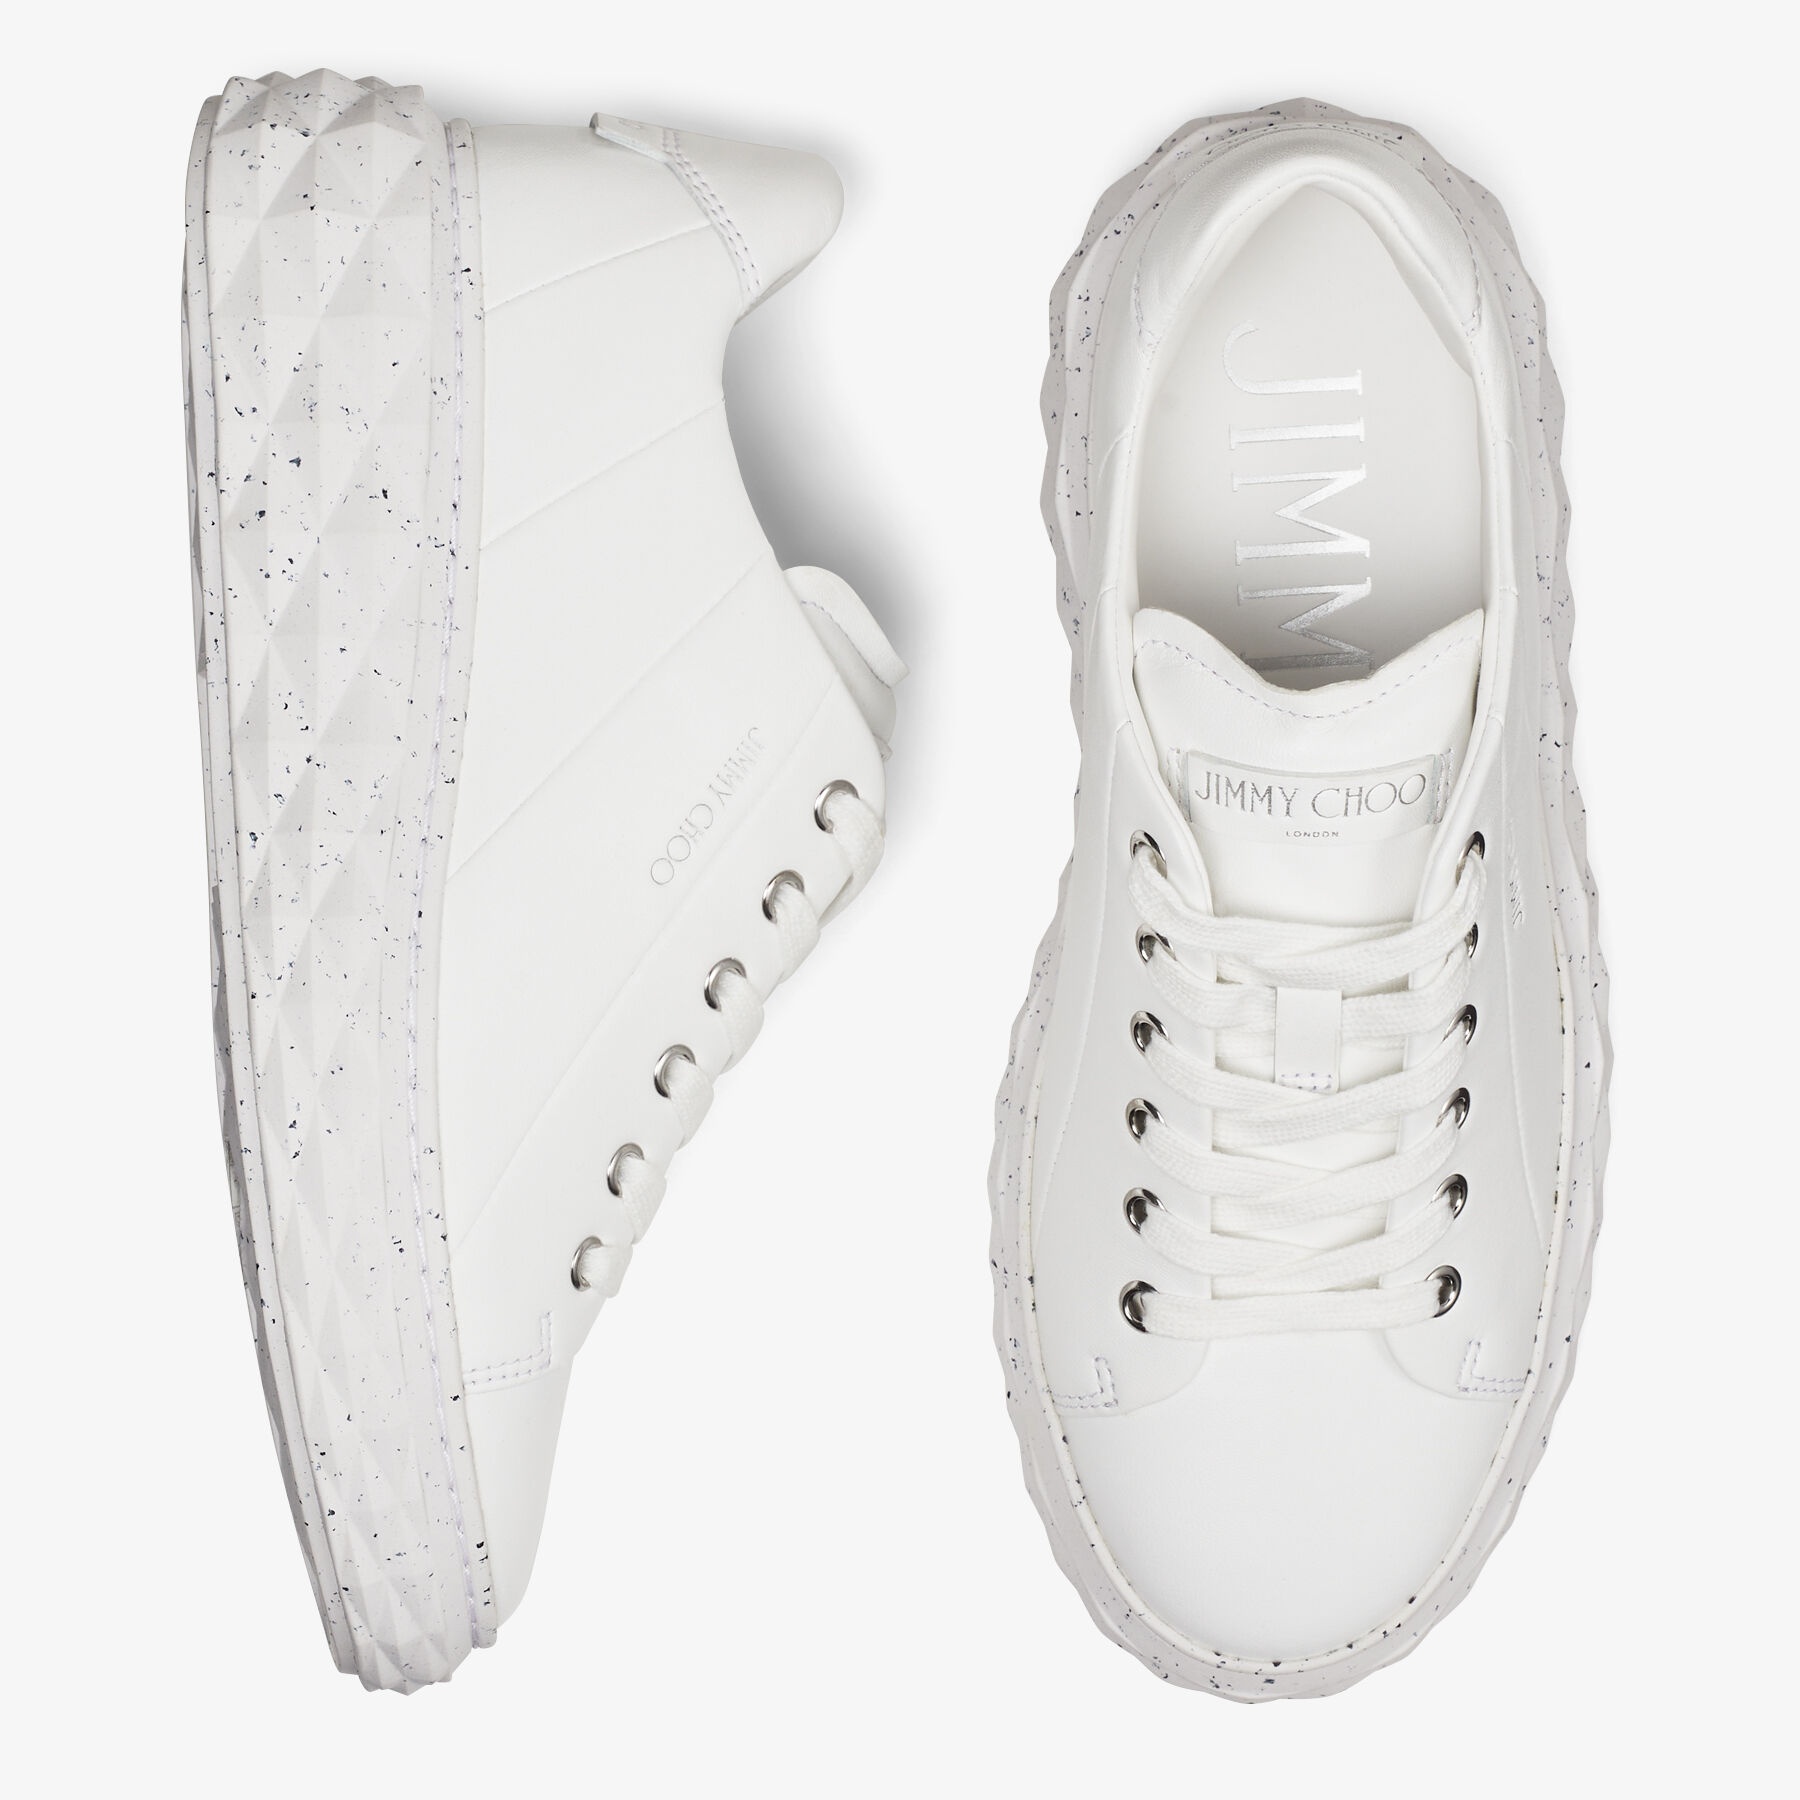 Diamond Light Maxi/F
White Nappa Leather Low-Top Trainers with Platform Sole - 6